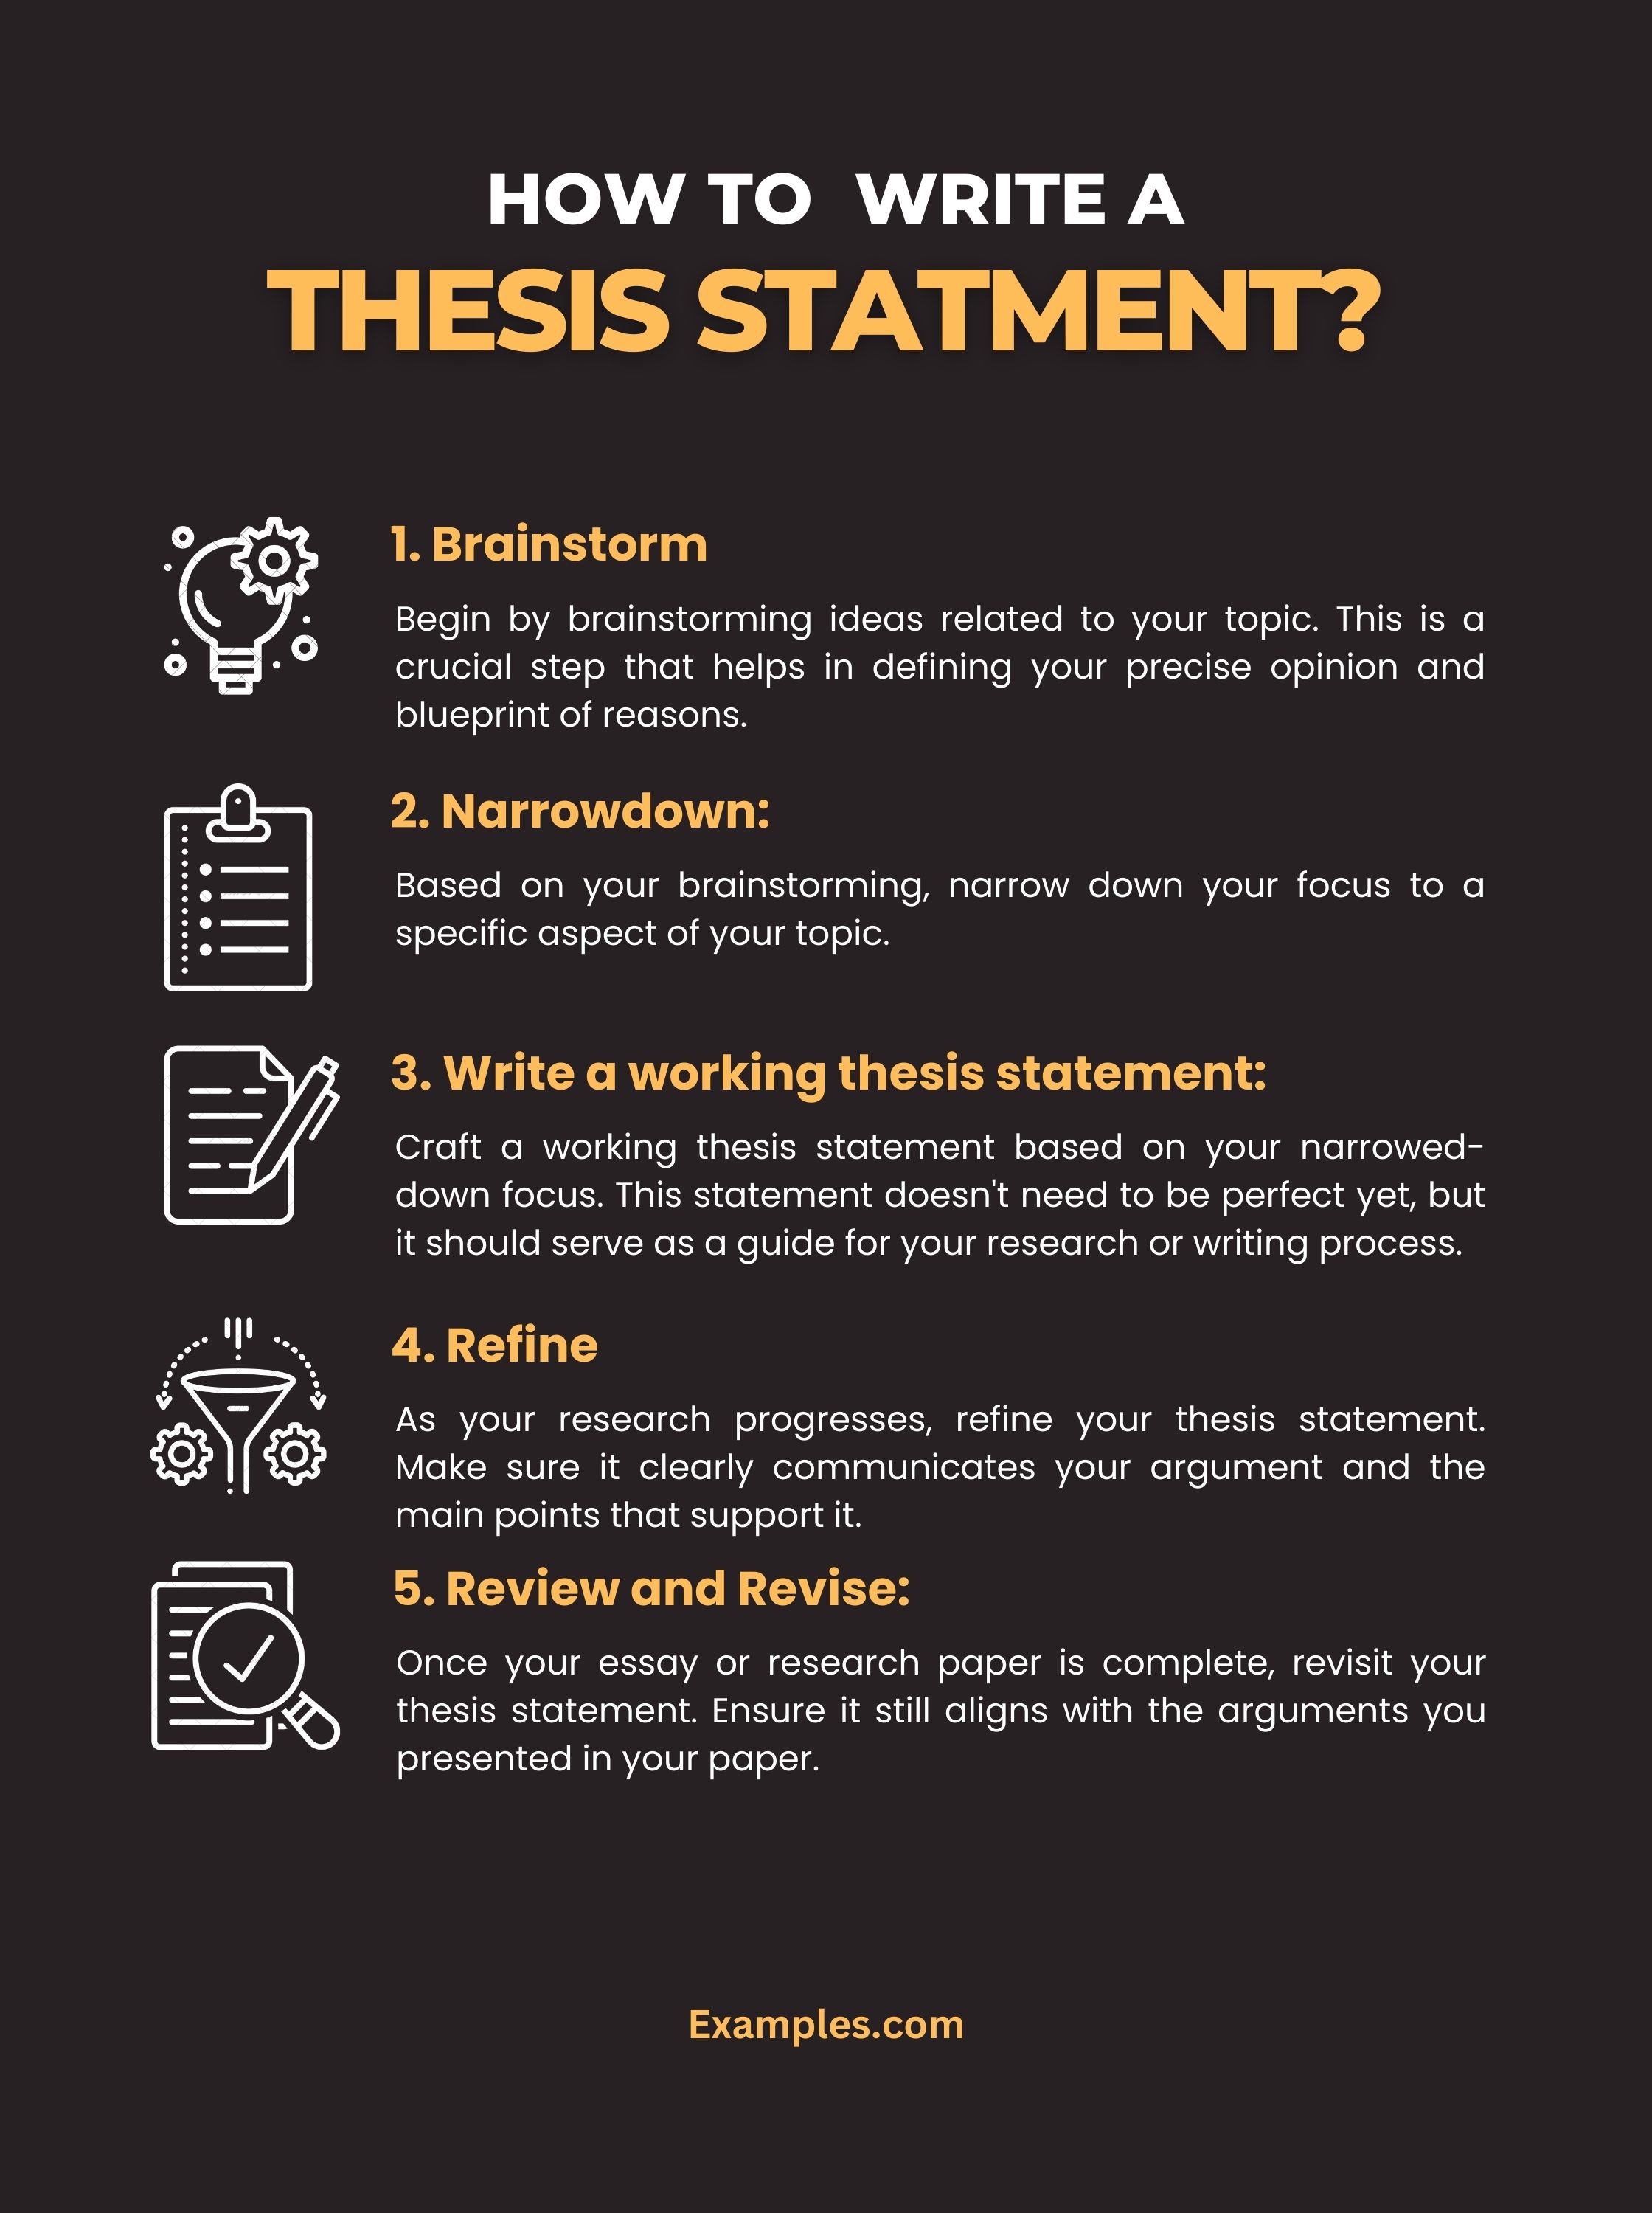 how to write thesis in 2 weeks